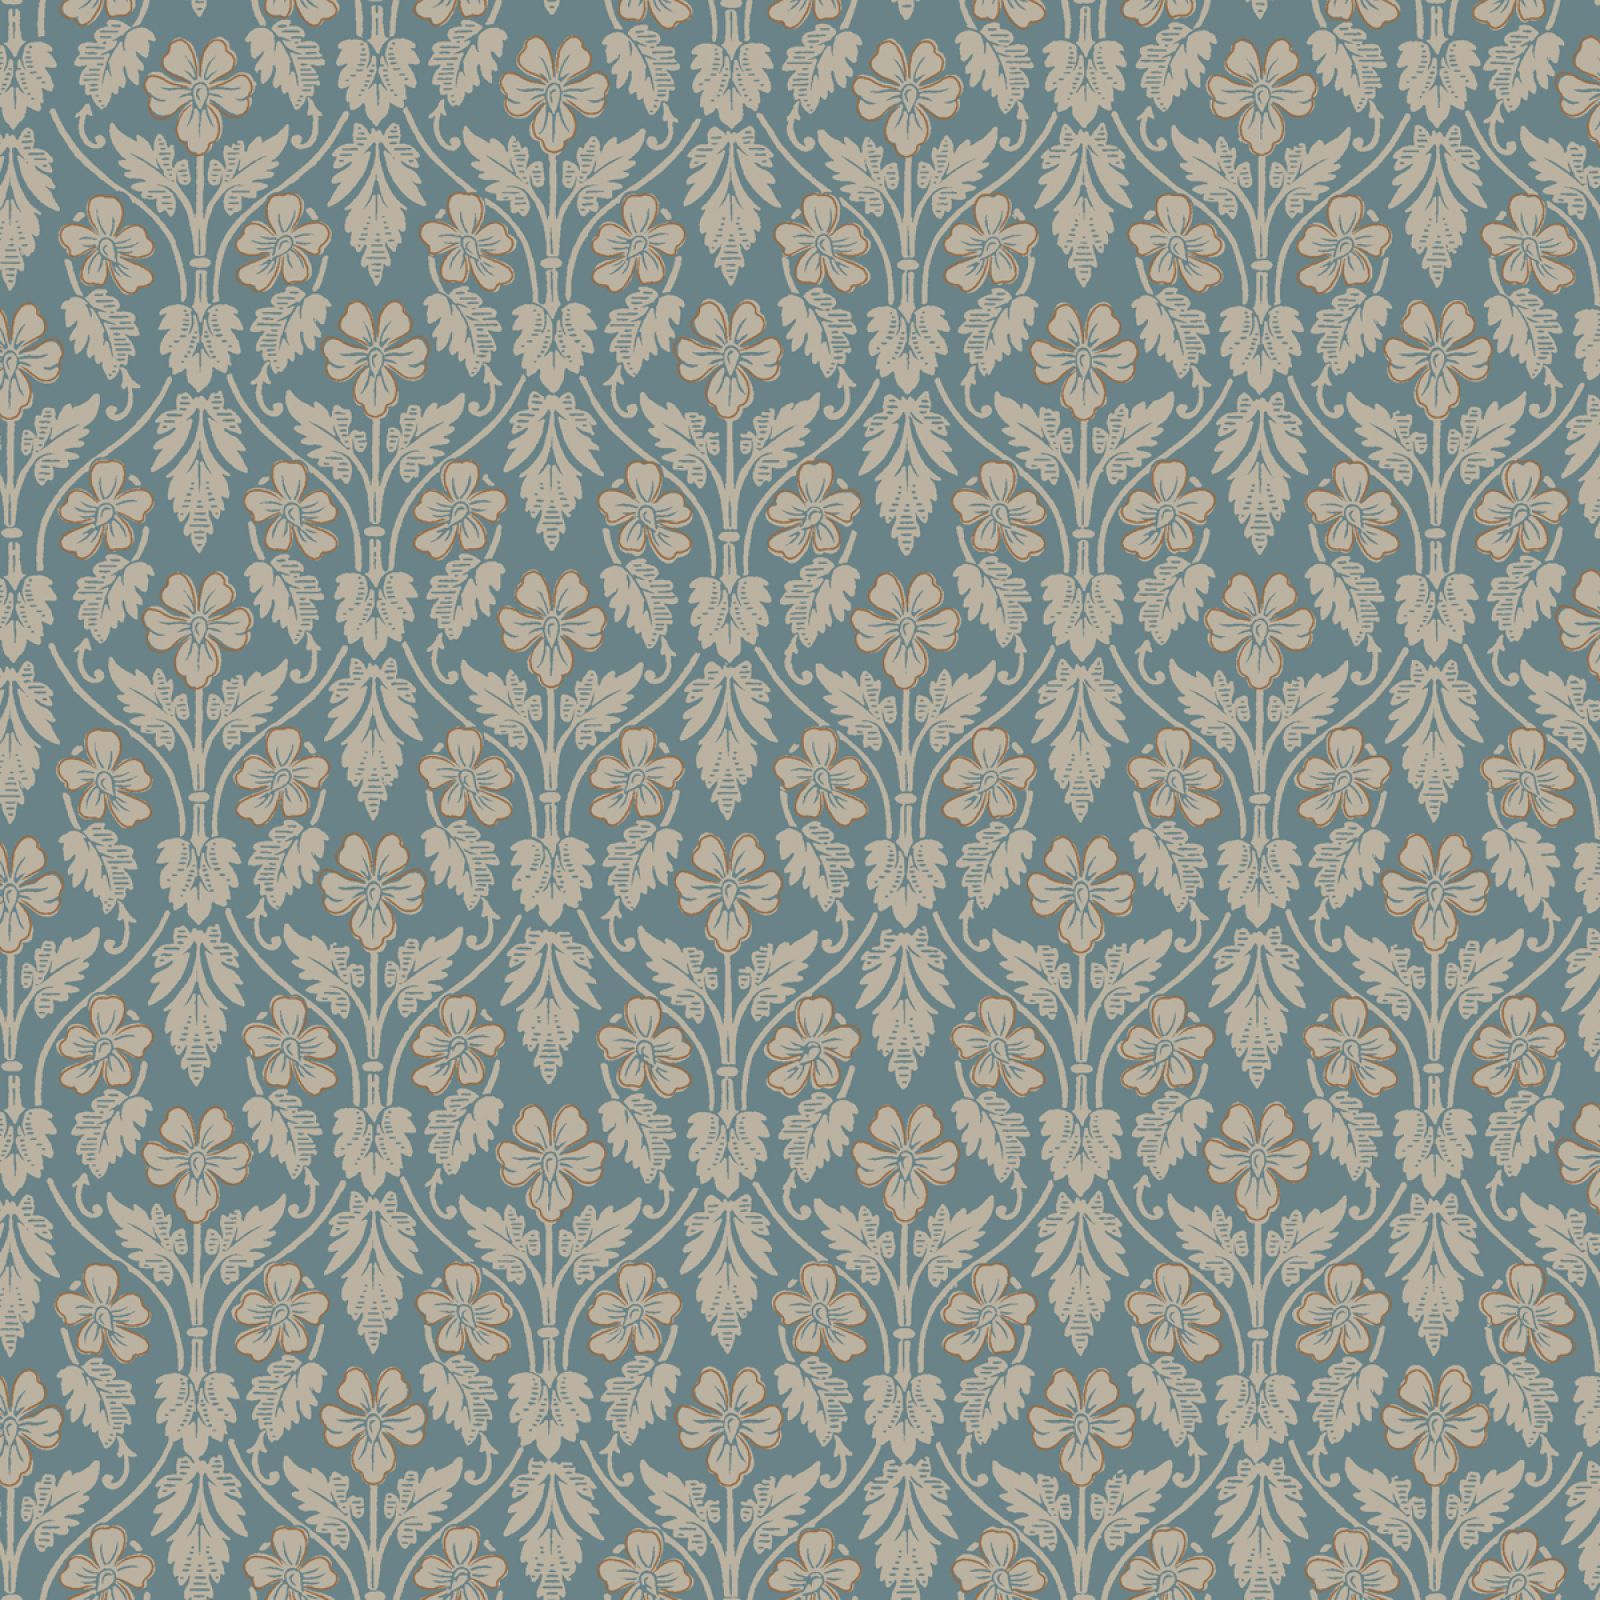 Intertwined leaves and flowers wallpaper - three colourways